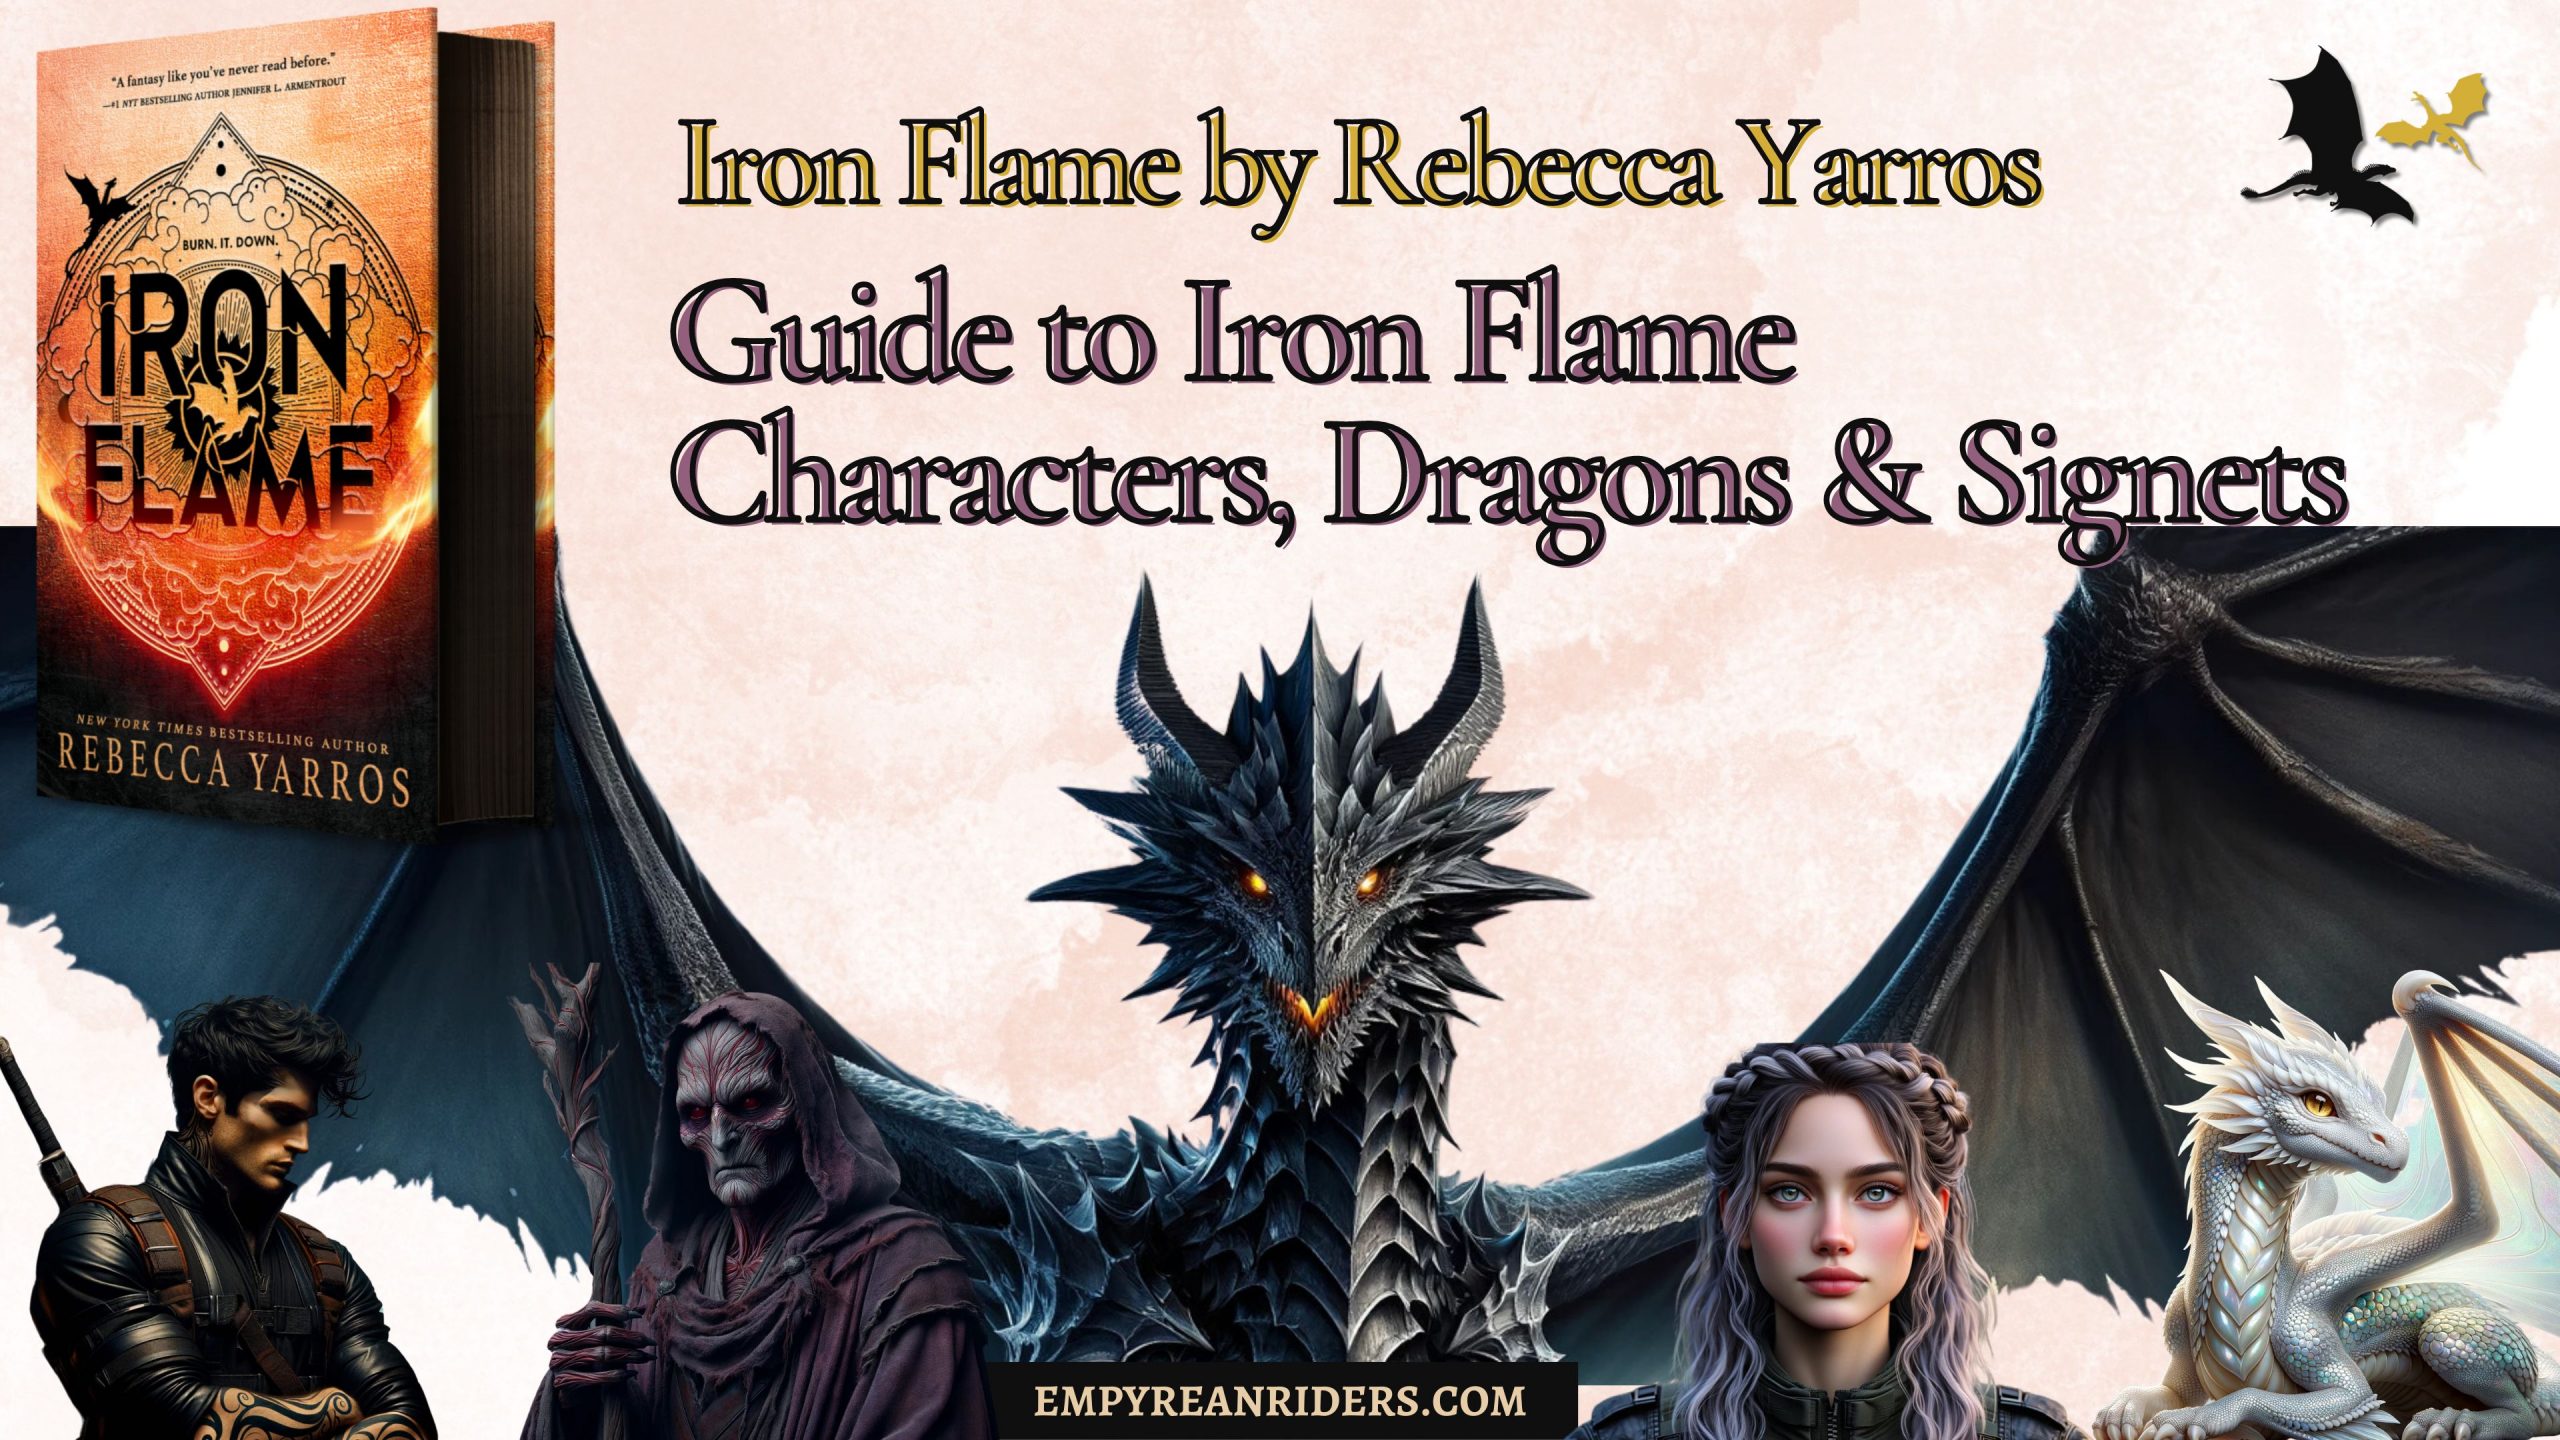 Guide to Iron Flame Characters, Dragons & Signets